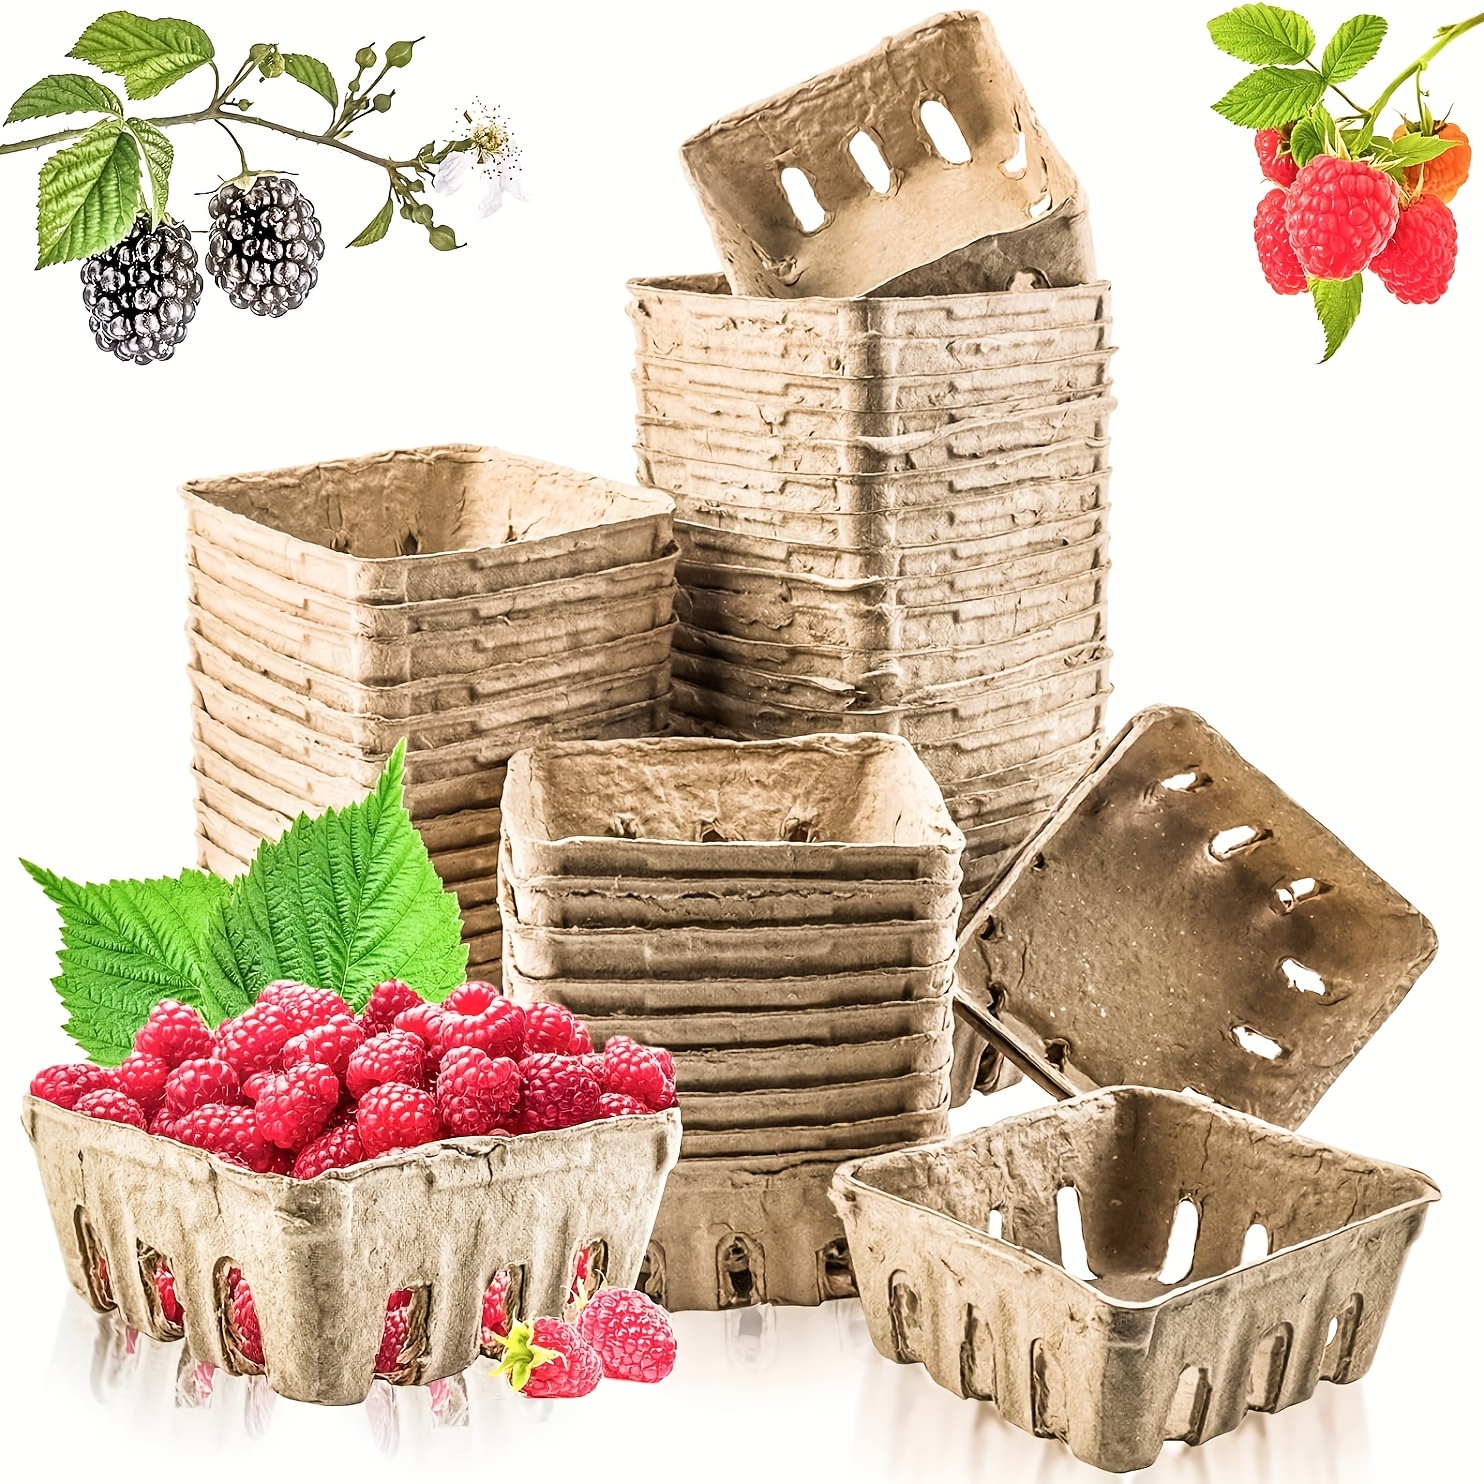 

10 Pcs Pulp Fiber , Small Farmers Market Produce Basket Containers, Kitchen Supplies For Strawberry Blueberry Raspberry Egg Vegetable, Kitchen Storage Items